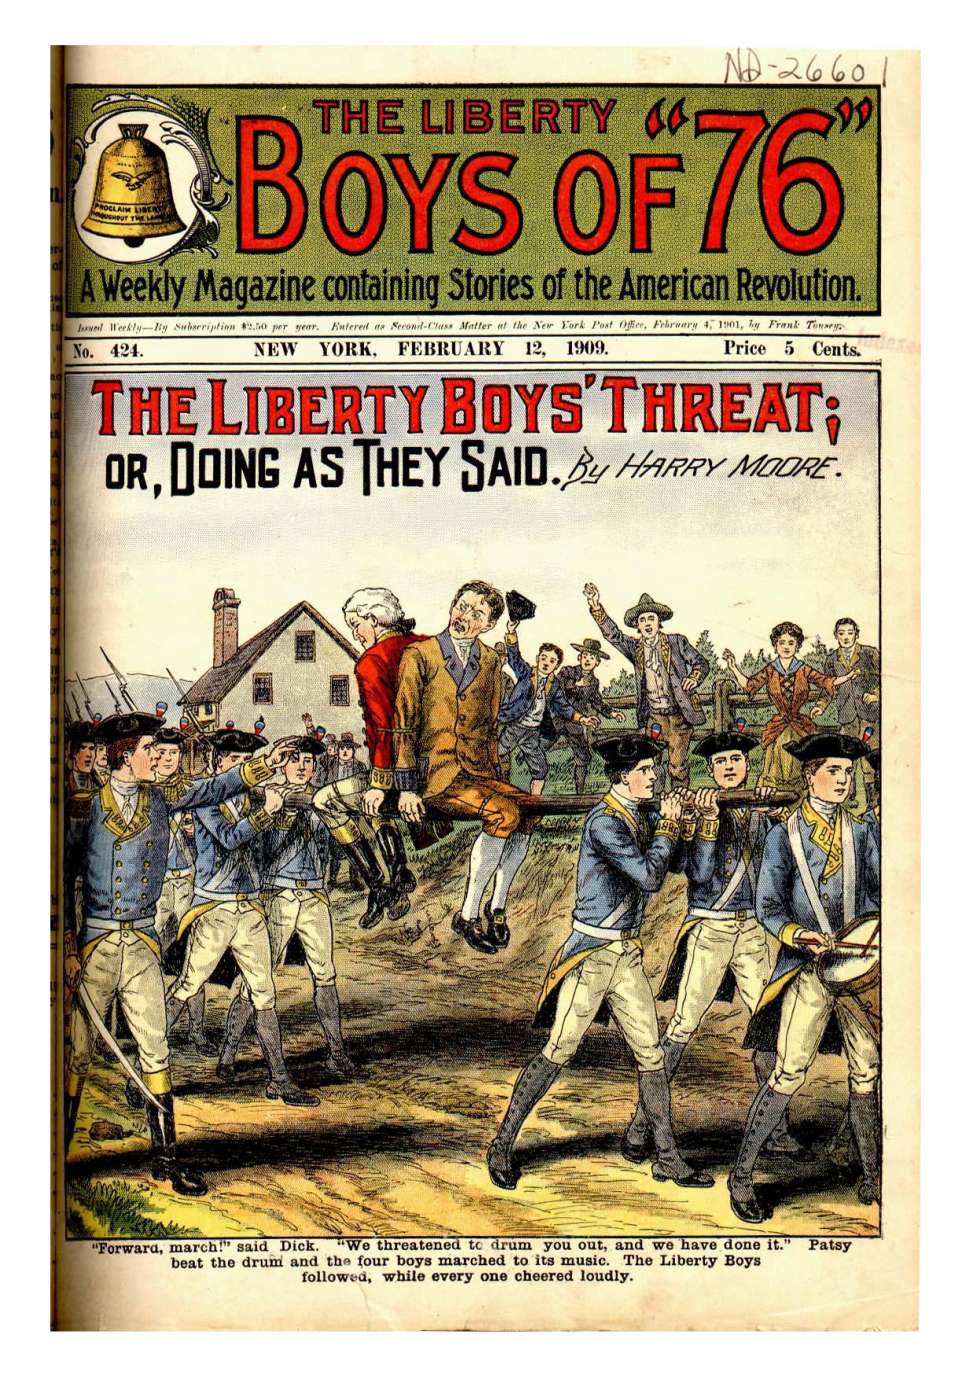 Book Cover For The Liberty Boys Of 76 - 424 The Liberty Boys' Threat